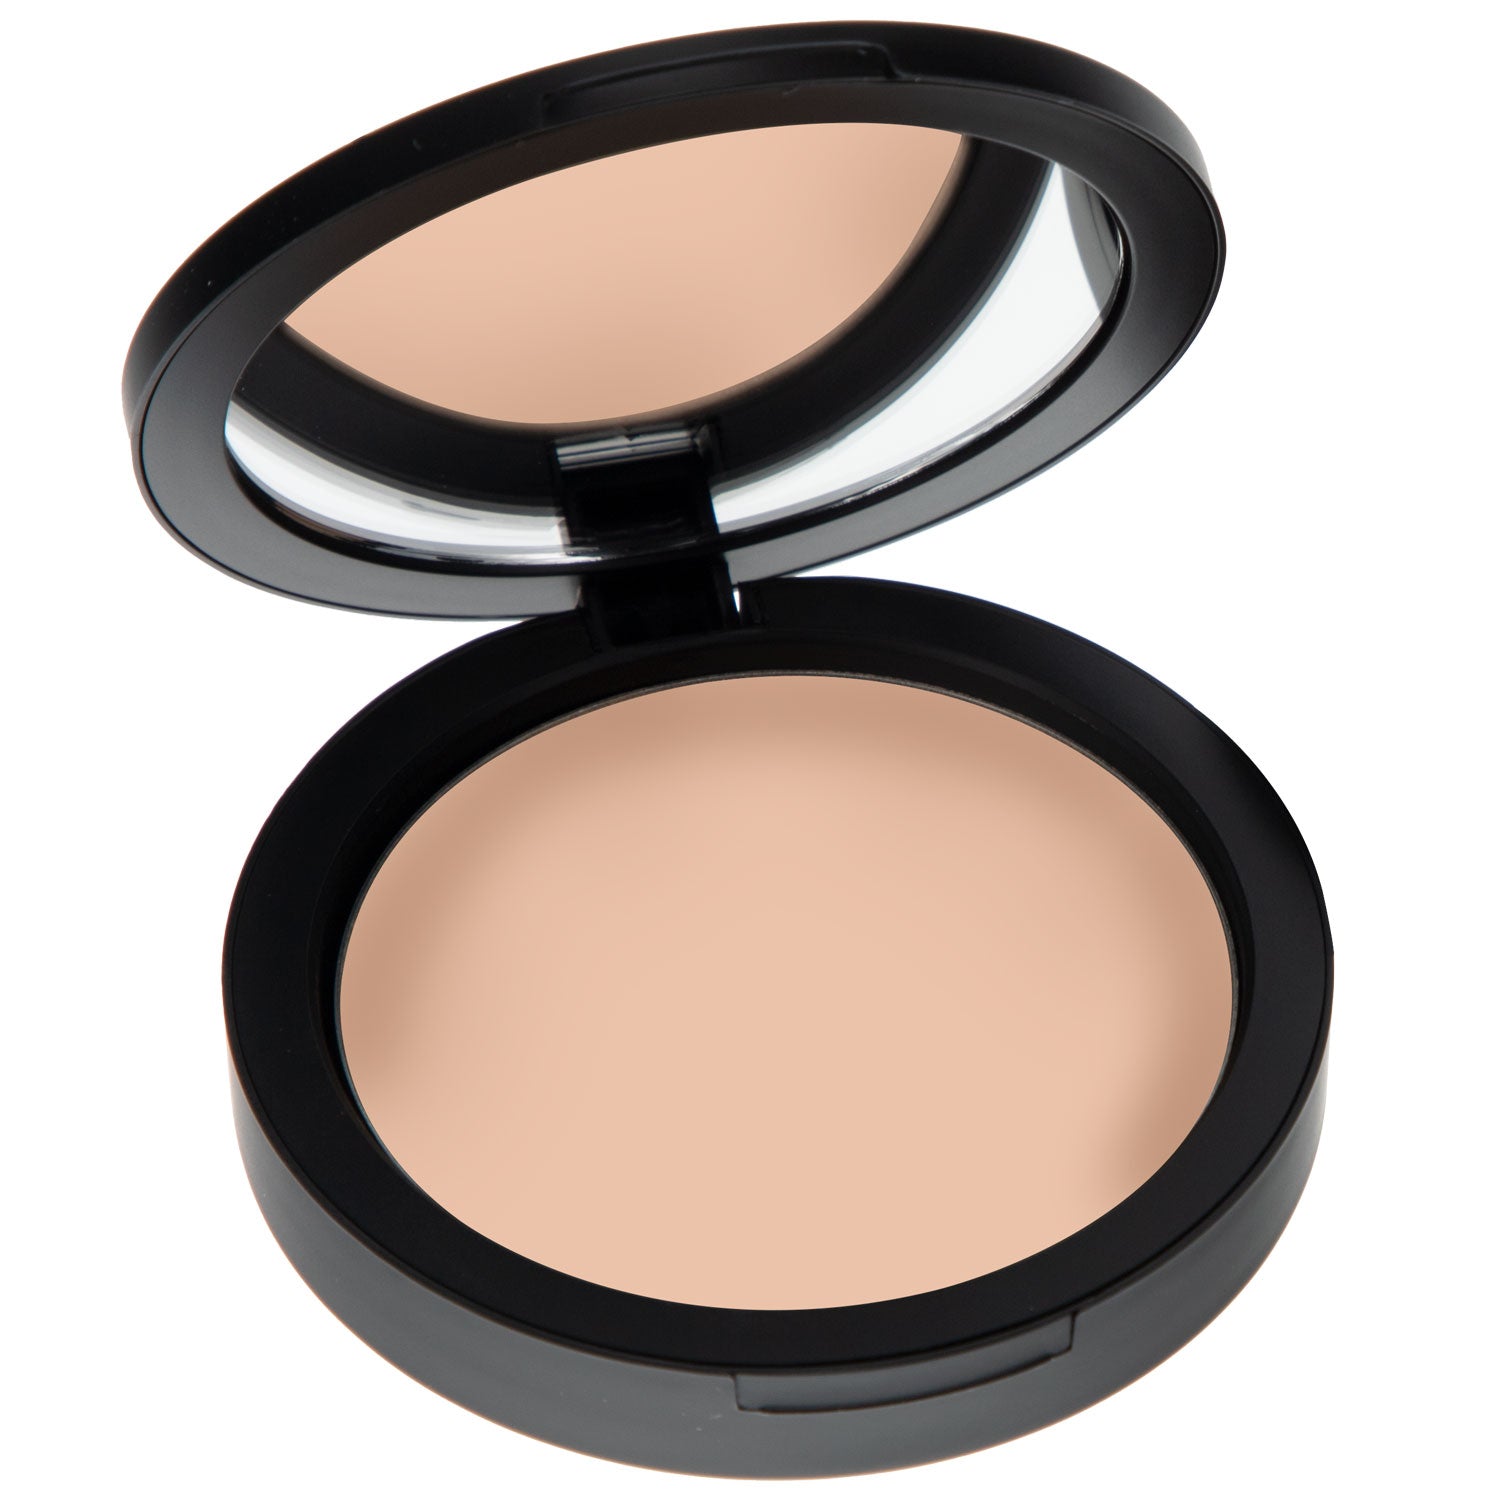 Mineral Based 4-in-1 Product is your PRESSED Powder, Foundation, SPF 15 and Soft Focus Finish All in One! No loose powder mess! Formulated without talc, gluten, phthalates, fragrance, GMO, parabens, or corn. DUE DATE (Medium) - For medium complexions. Tans easily in the sun.